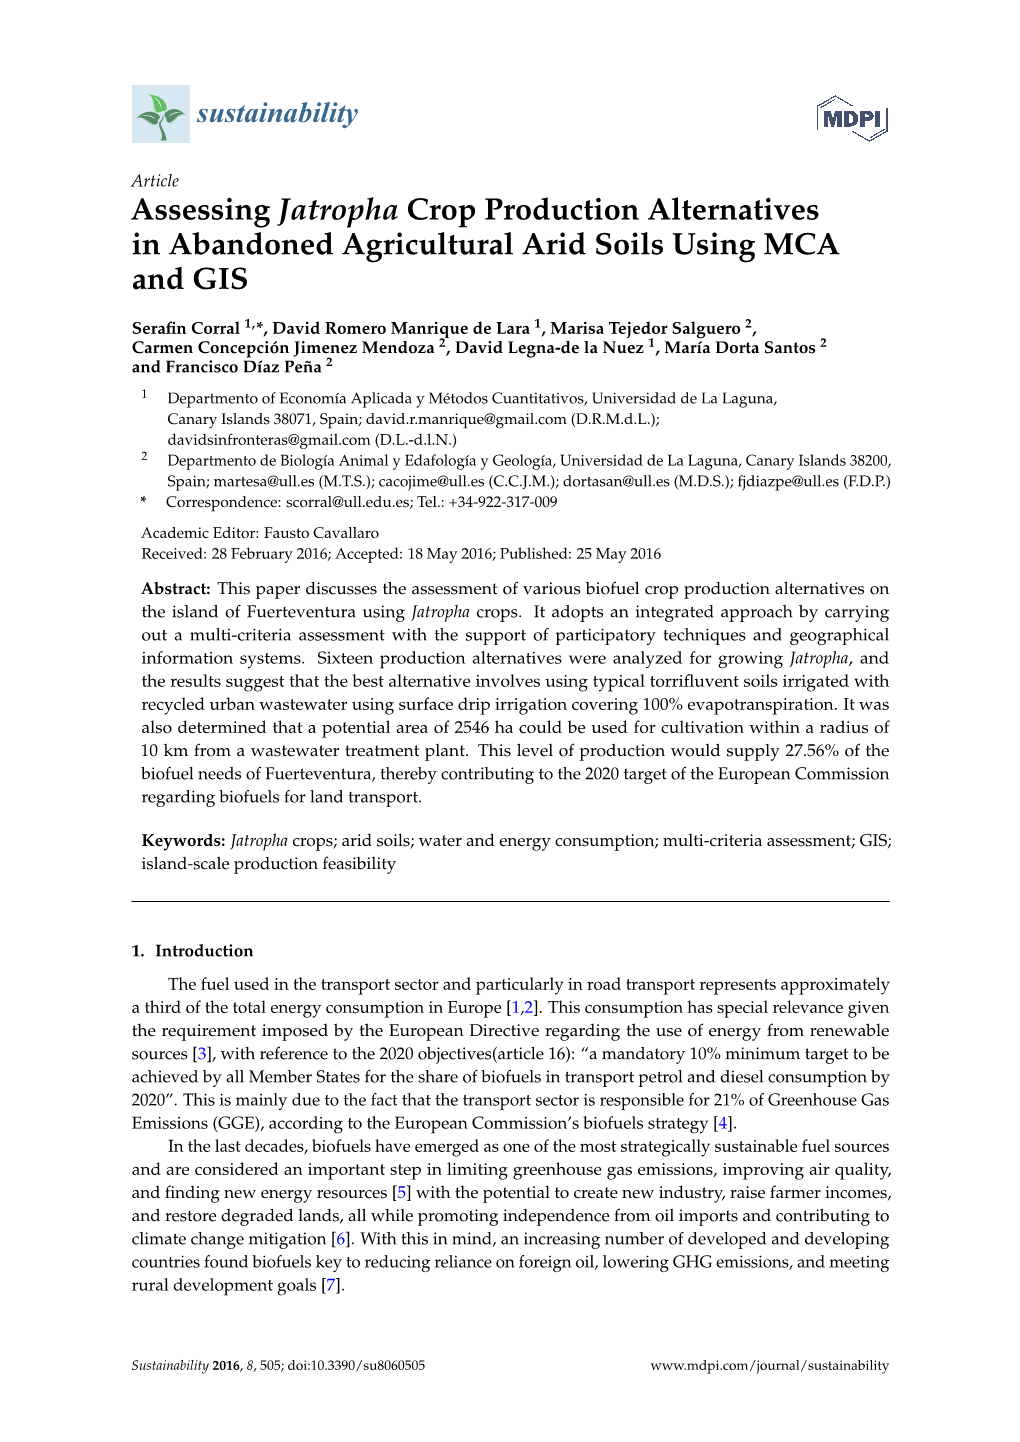 Assessing Jatropha Crop Production Alternatives in Abandoned Agricultural Arid Soils Using MCA and GIS